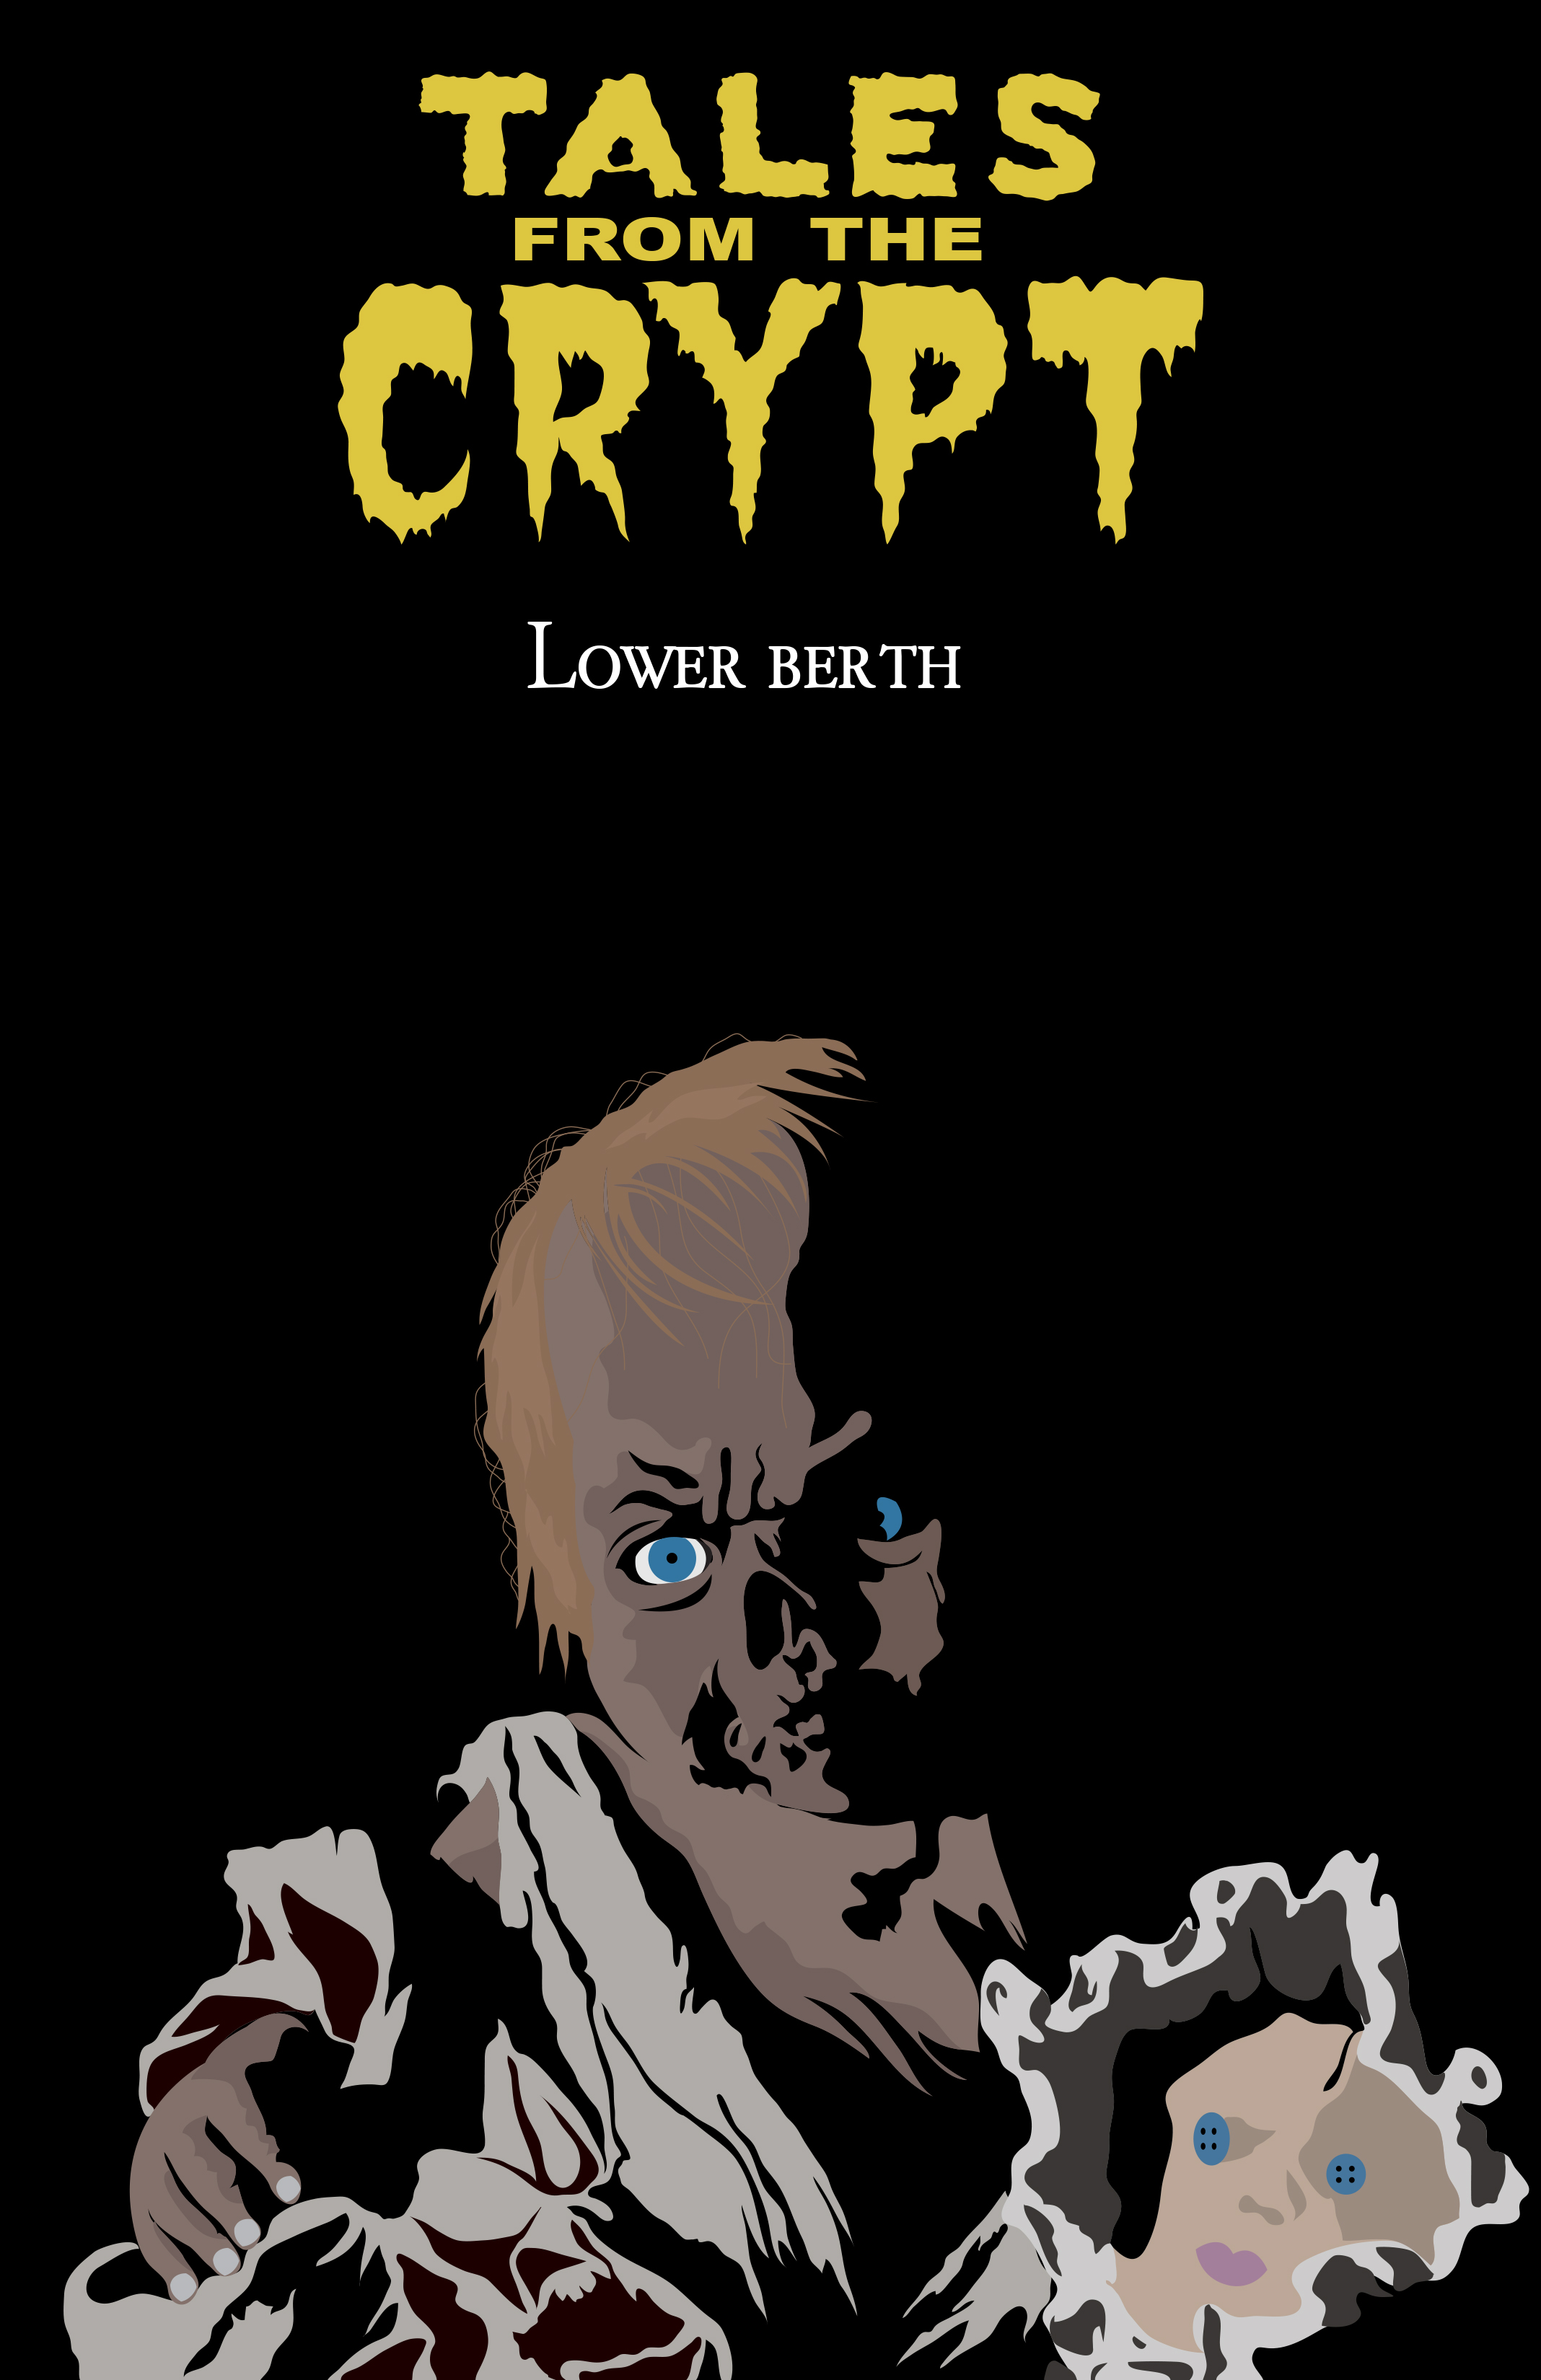 Tales from the Crypt: Lower Berth